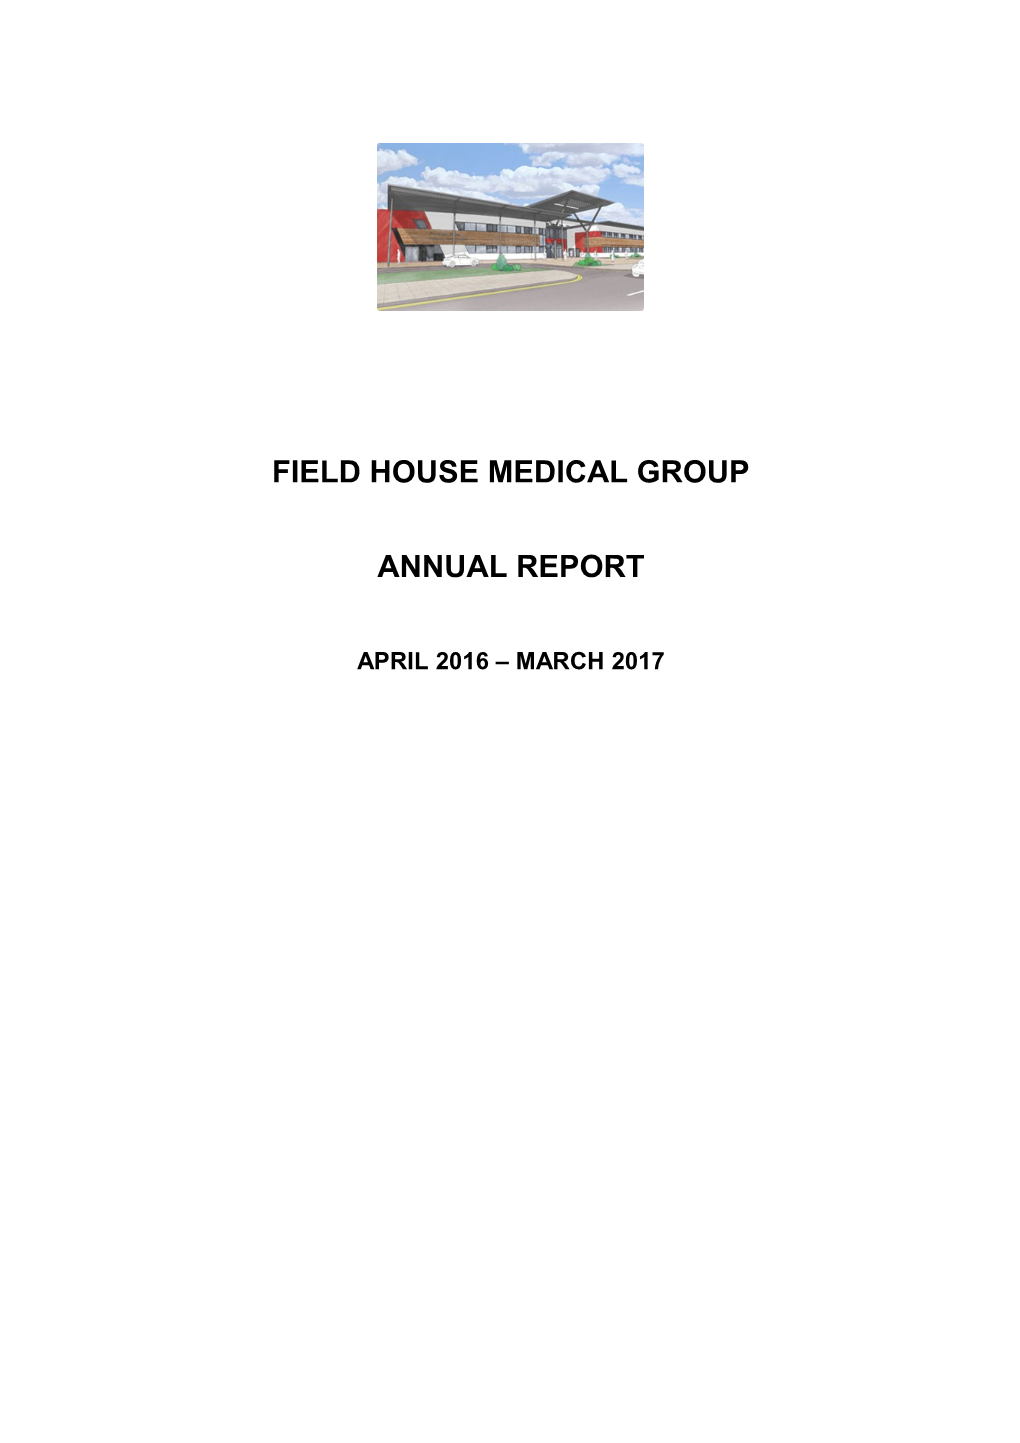 Field House Medical Group